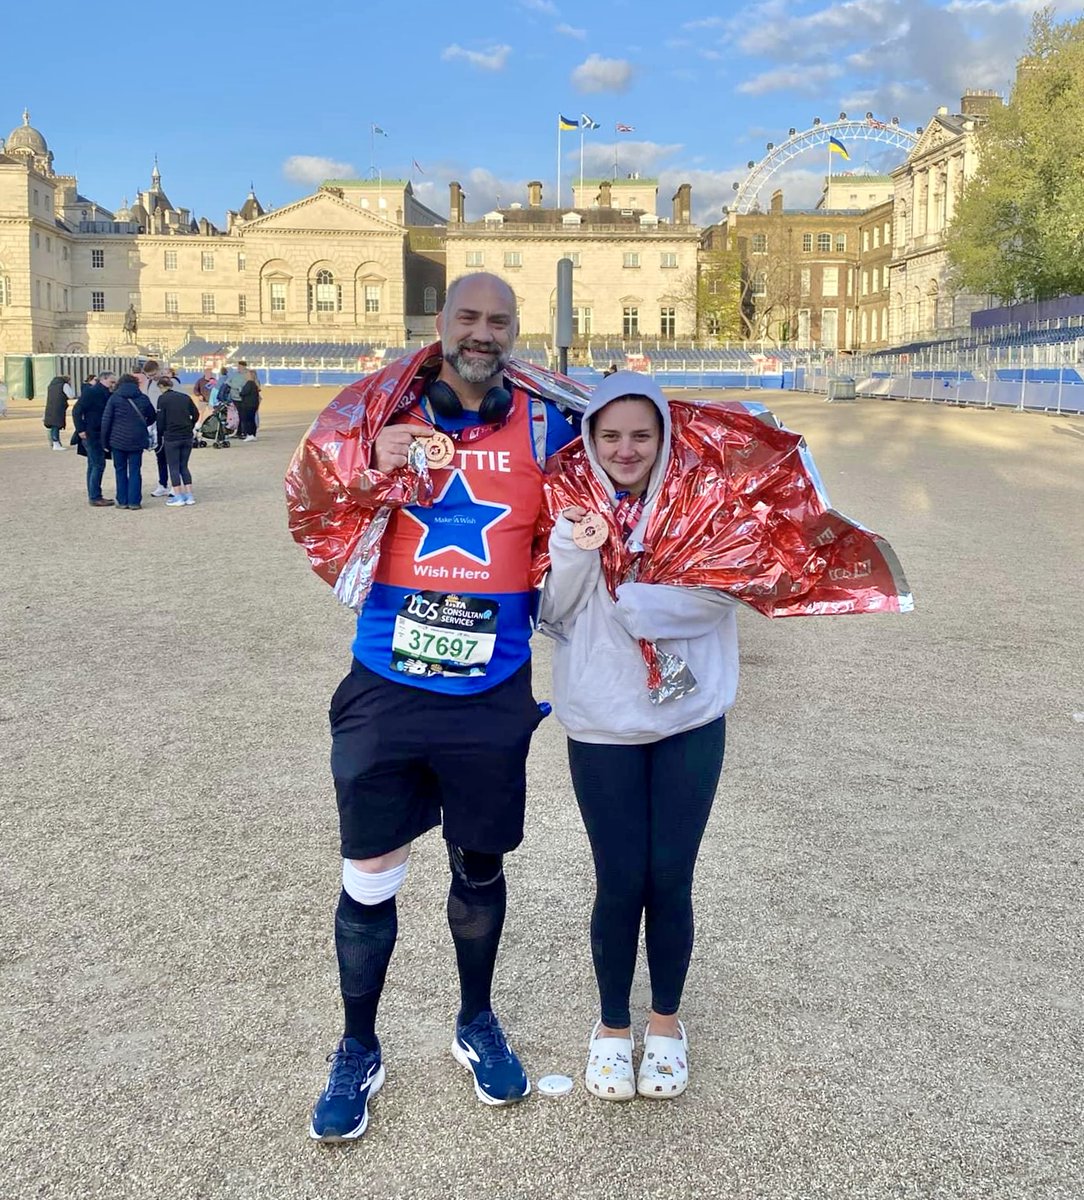 Congratulations to YPB driver, Chris Brett, who completed the #LondonMarathon in aid of @MakeAWishUK✨ What an incredible accomplishment for such a worthy cause. Please show your support and donate to his fundraising page here 👇 tinyurl.com/53ybtbb5 👏👏👏